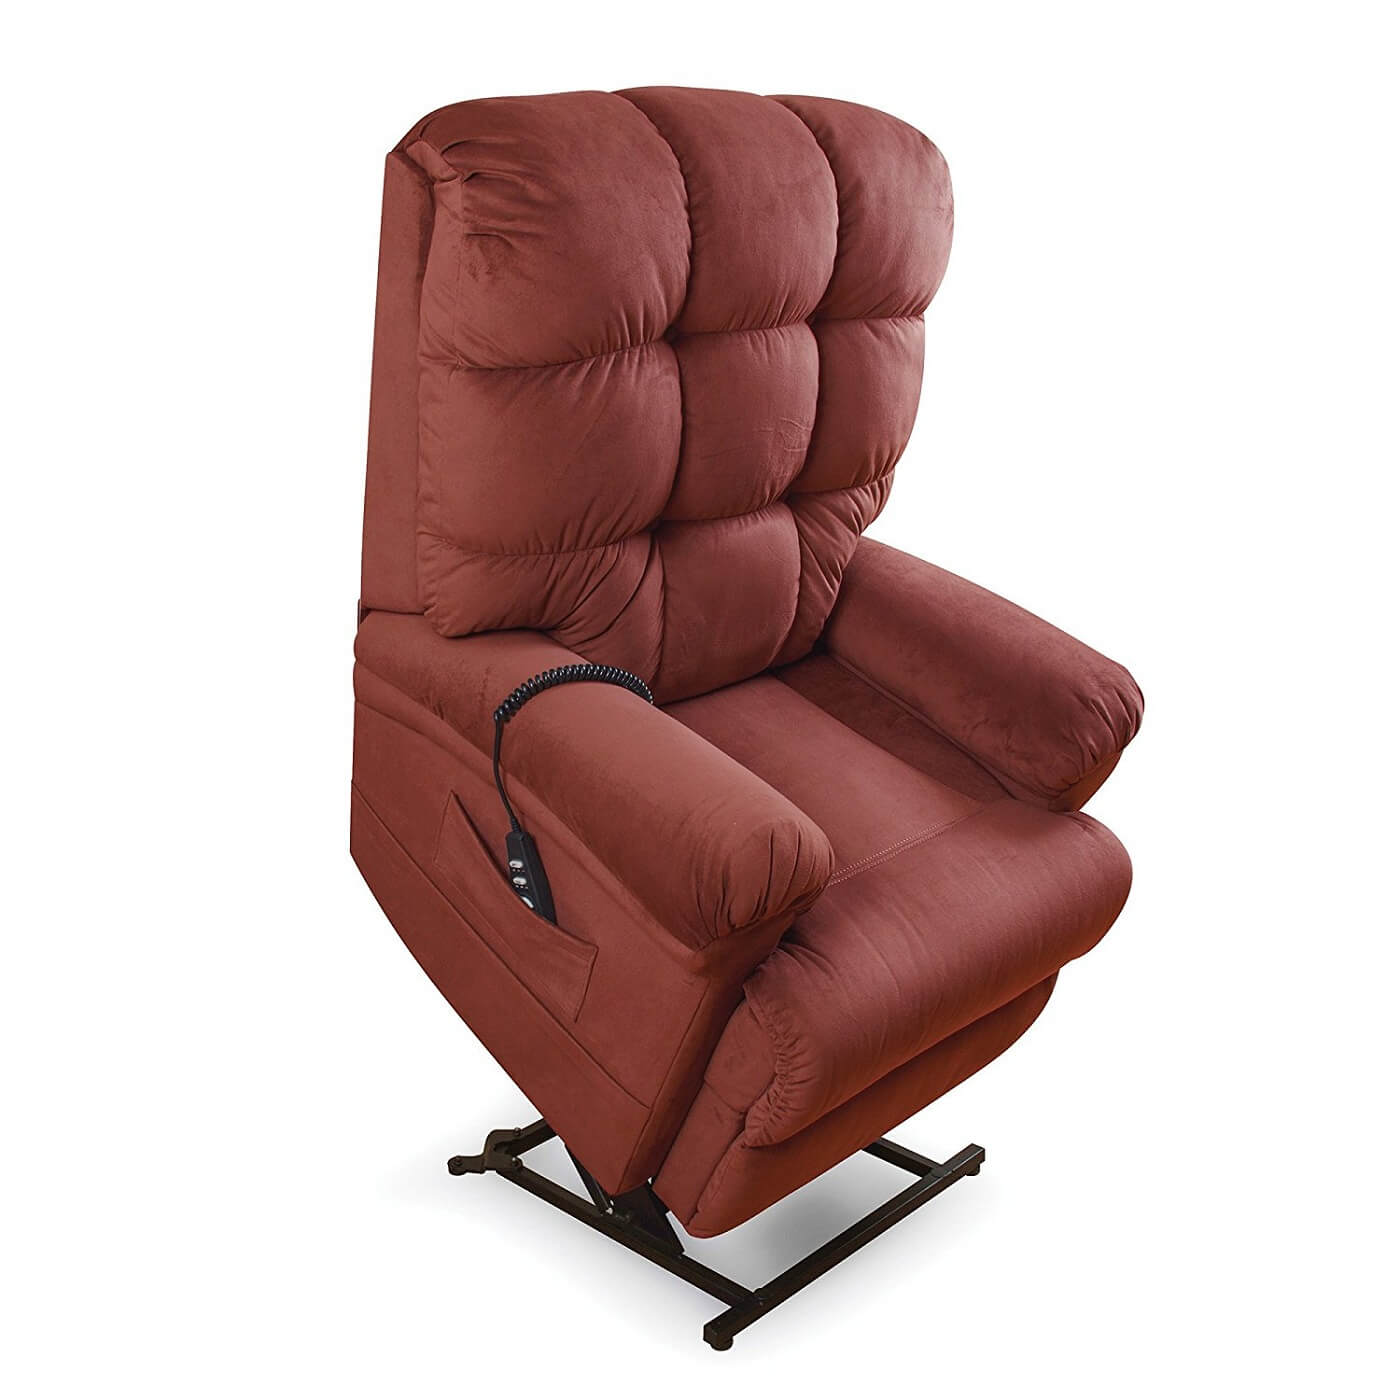 The Perfect Sleep Chair Reviews And Buying Guide In 2021 Review Price